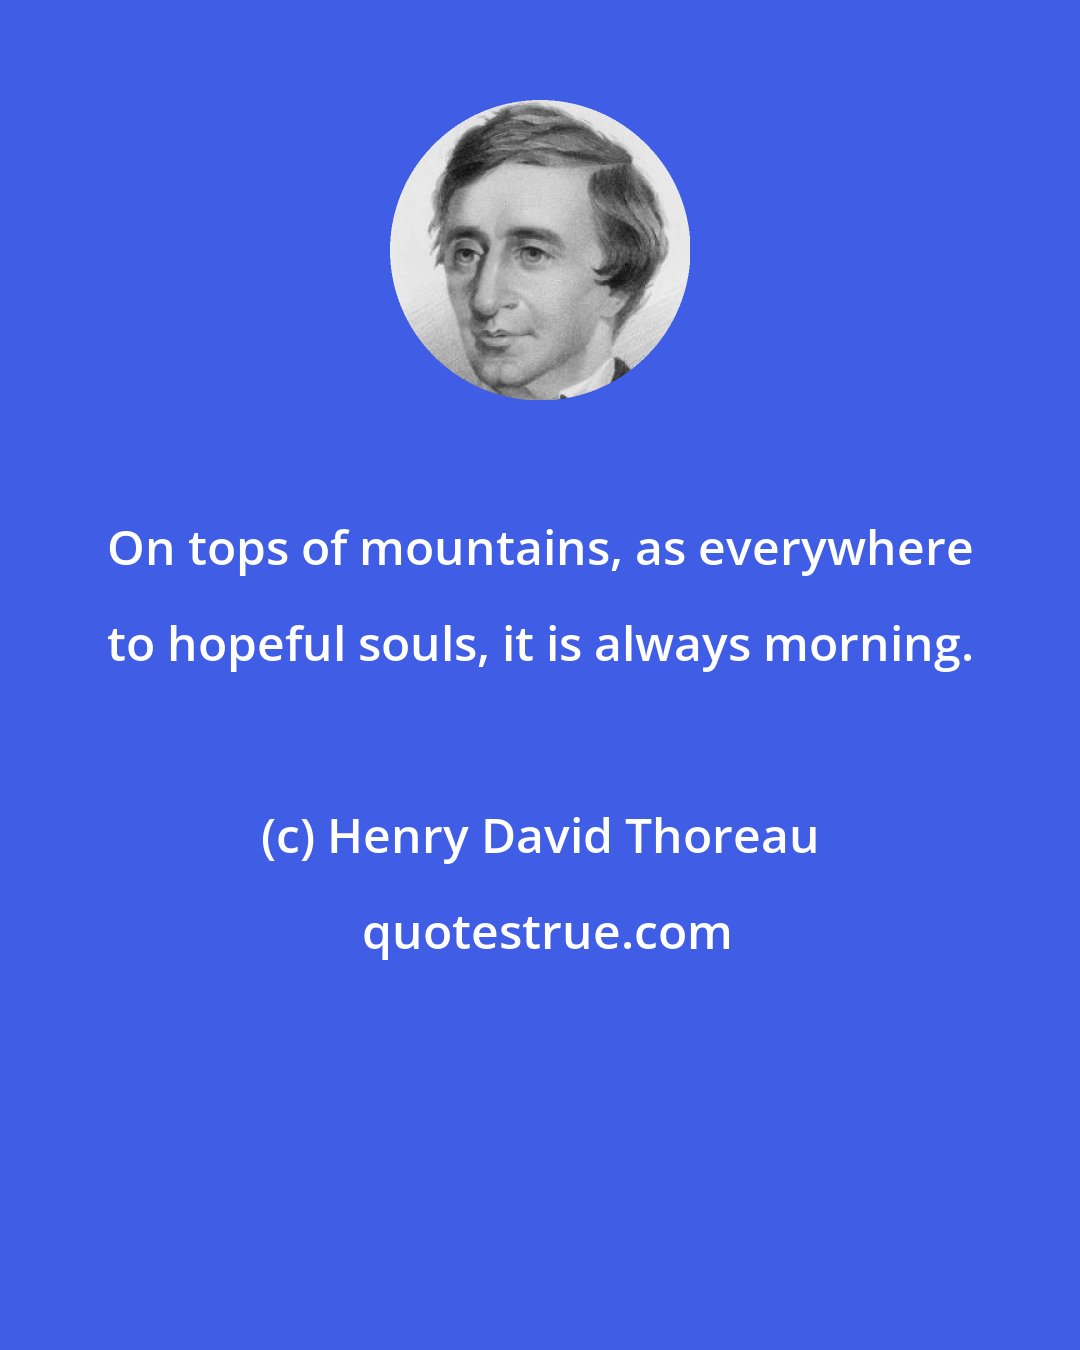 Henry David Thoreau: On tops of mountains, as everywhere to hopeful souls, it is always morning.